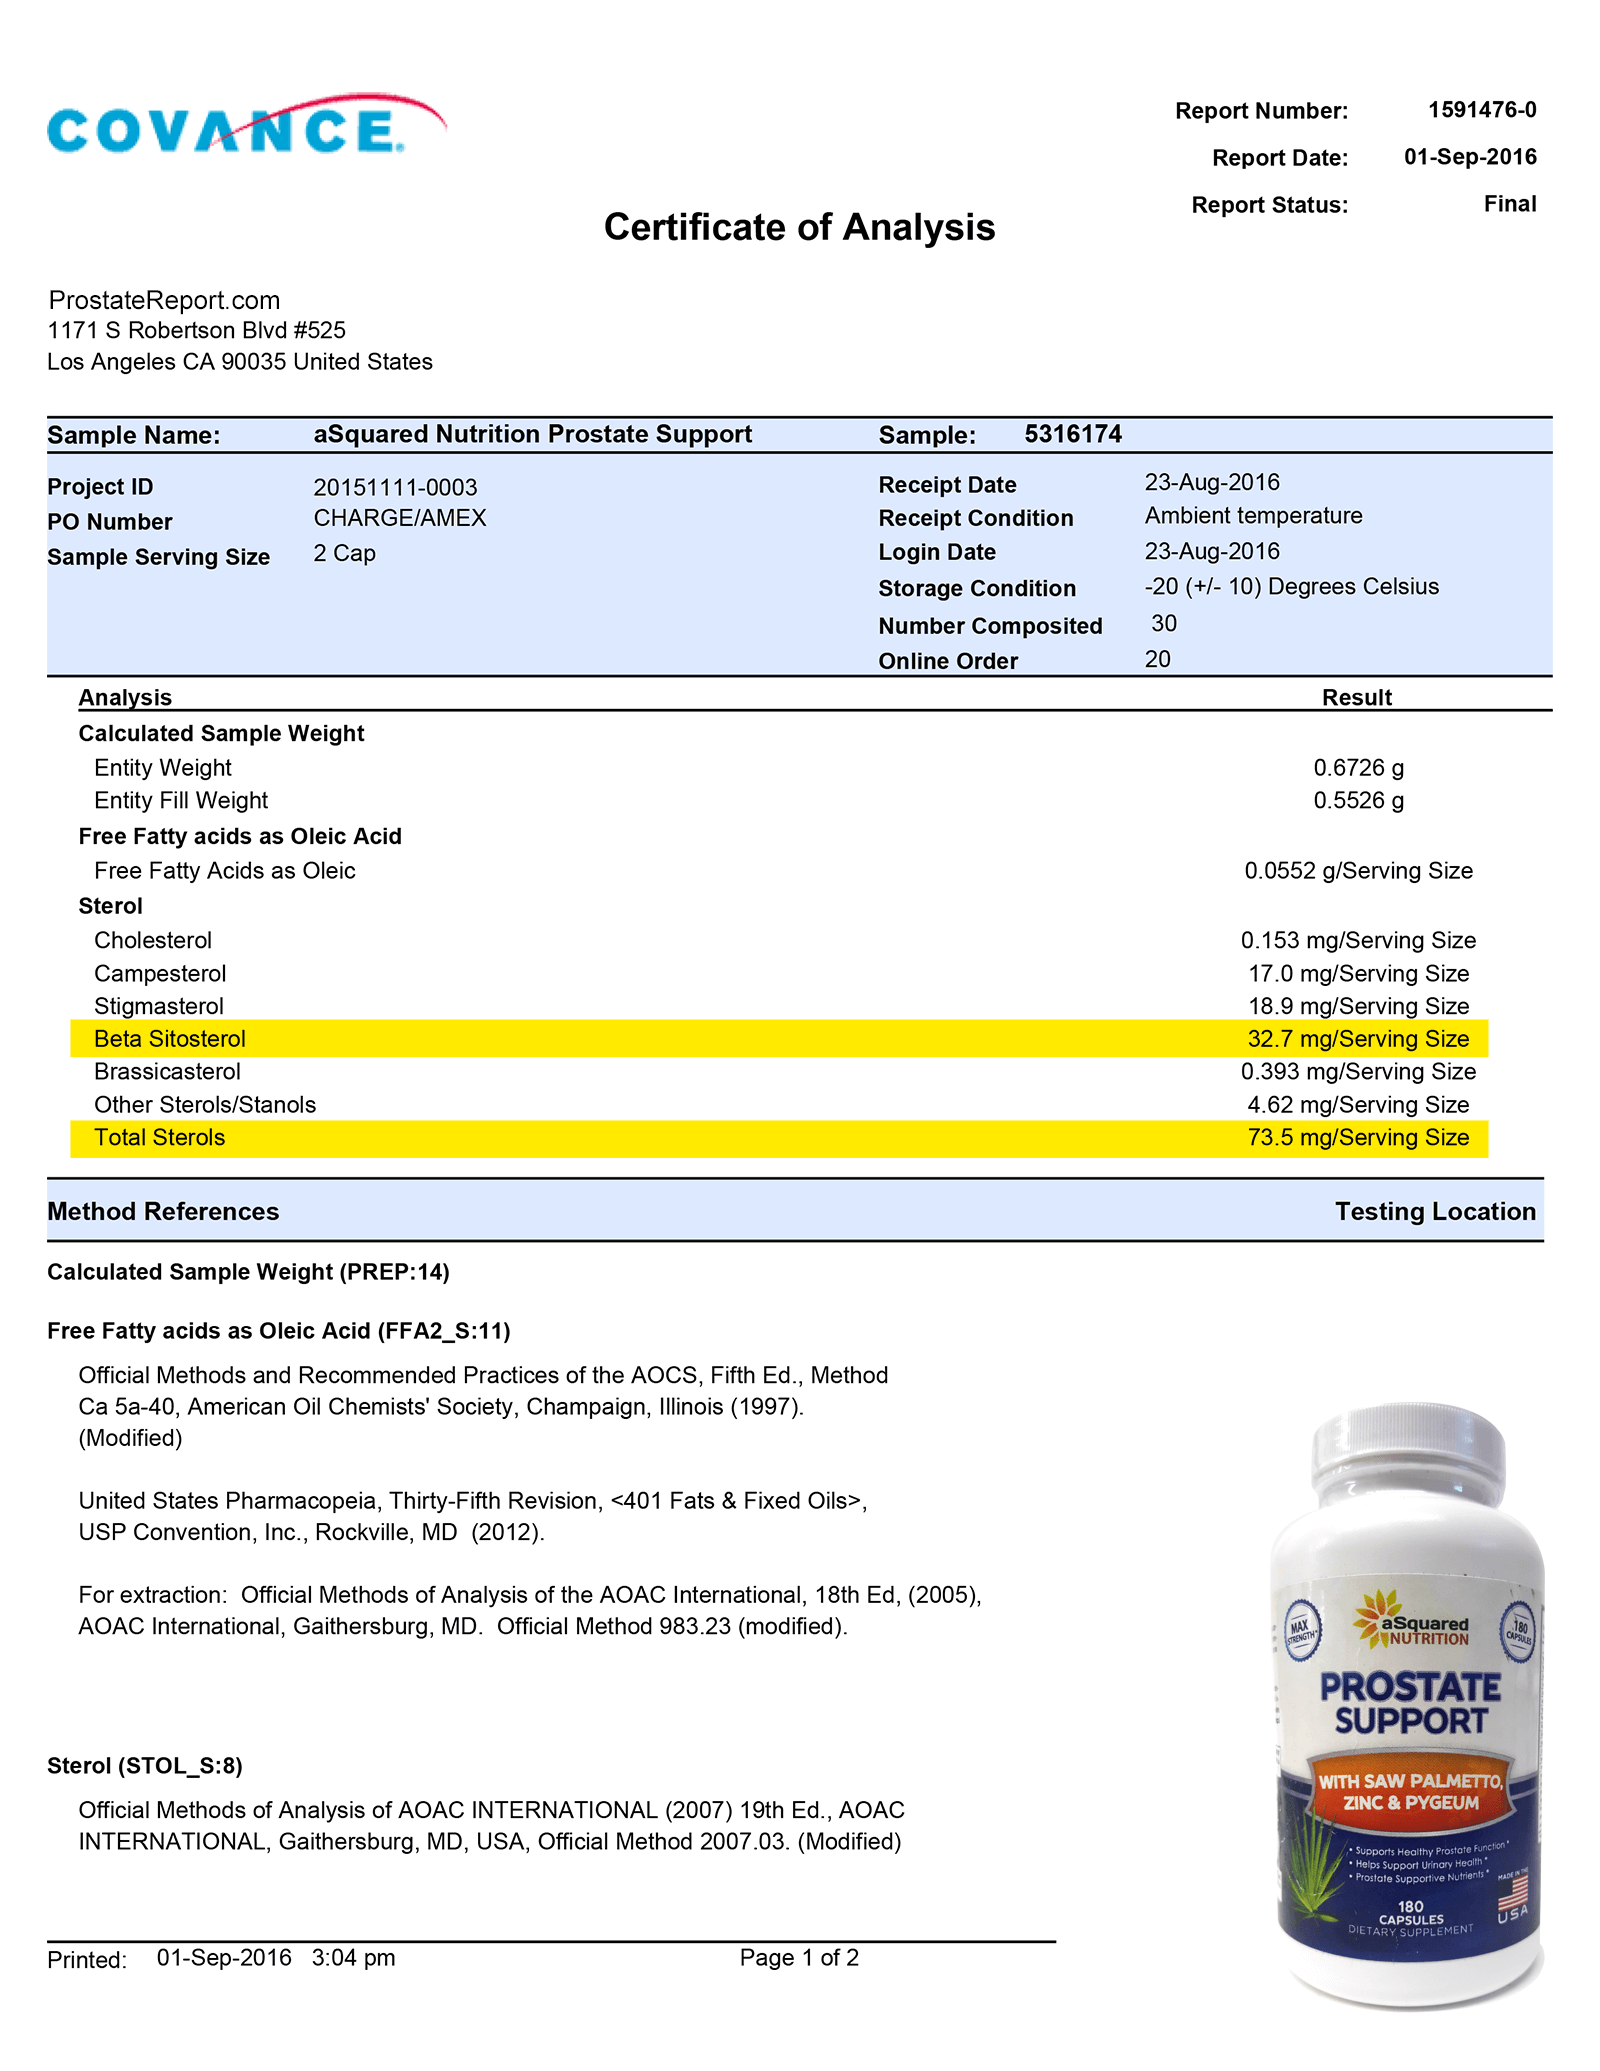 Prostate Support lab report 